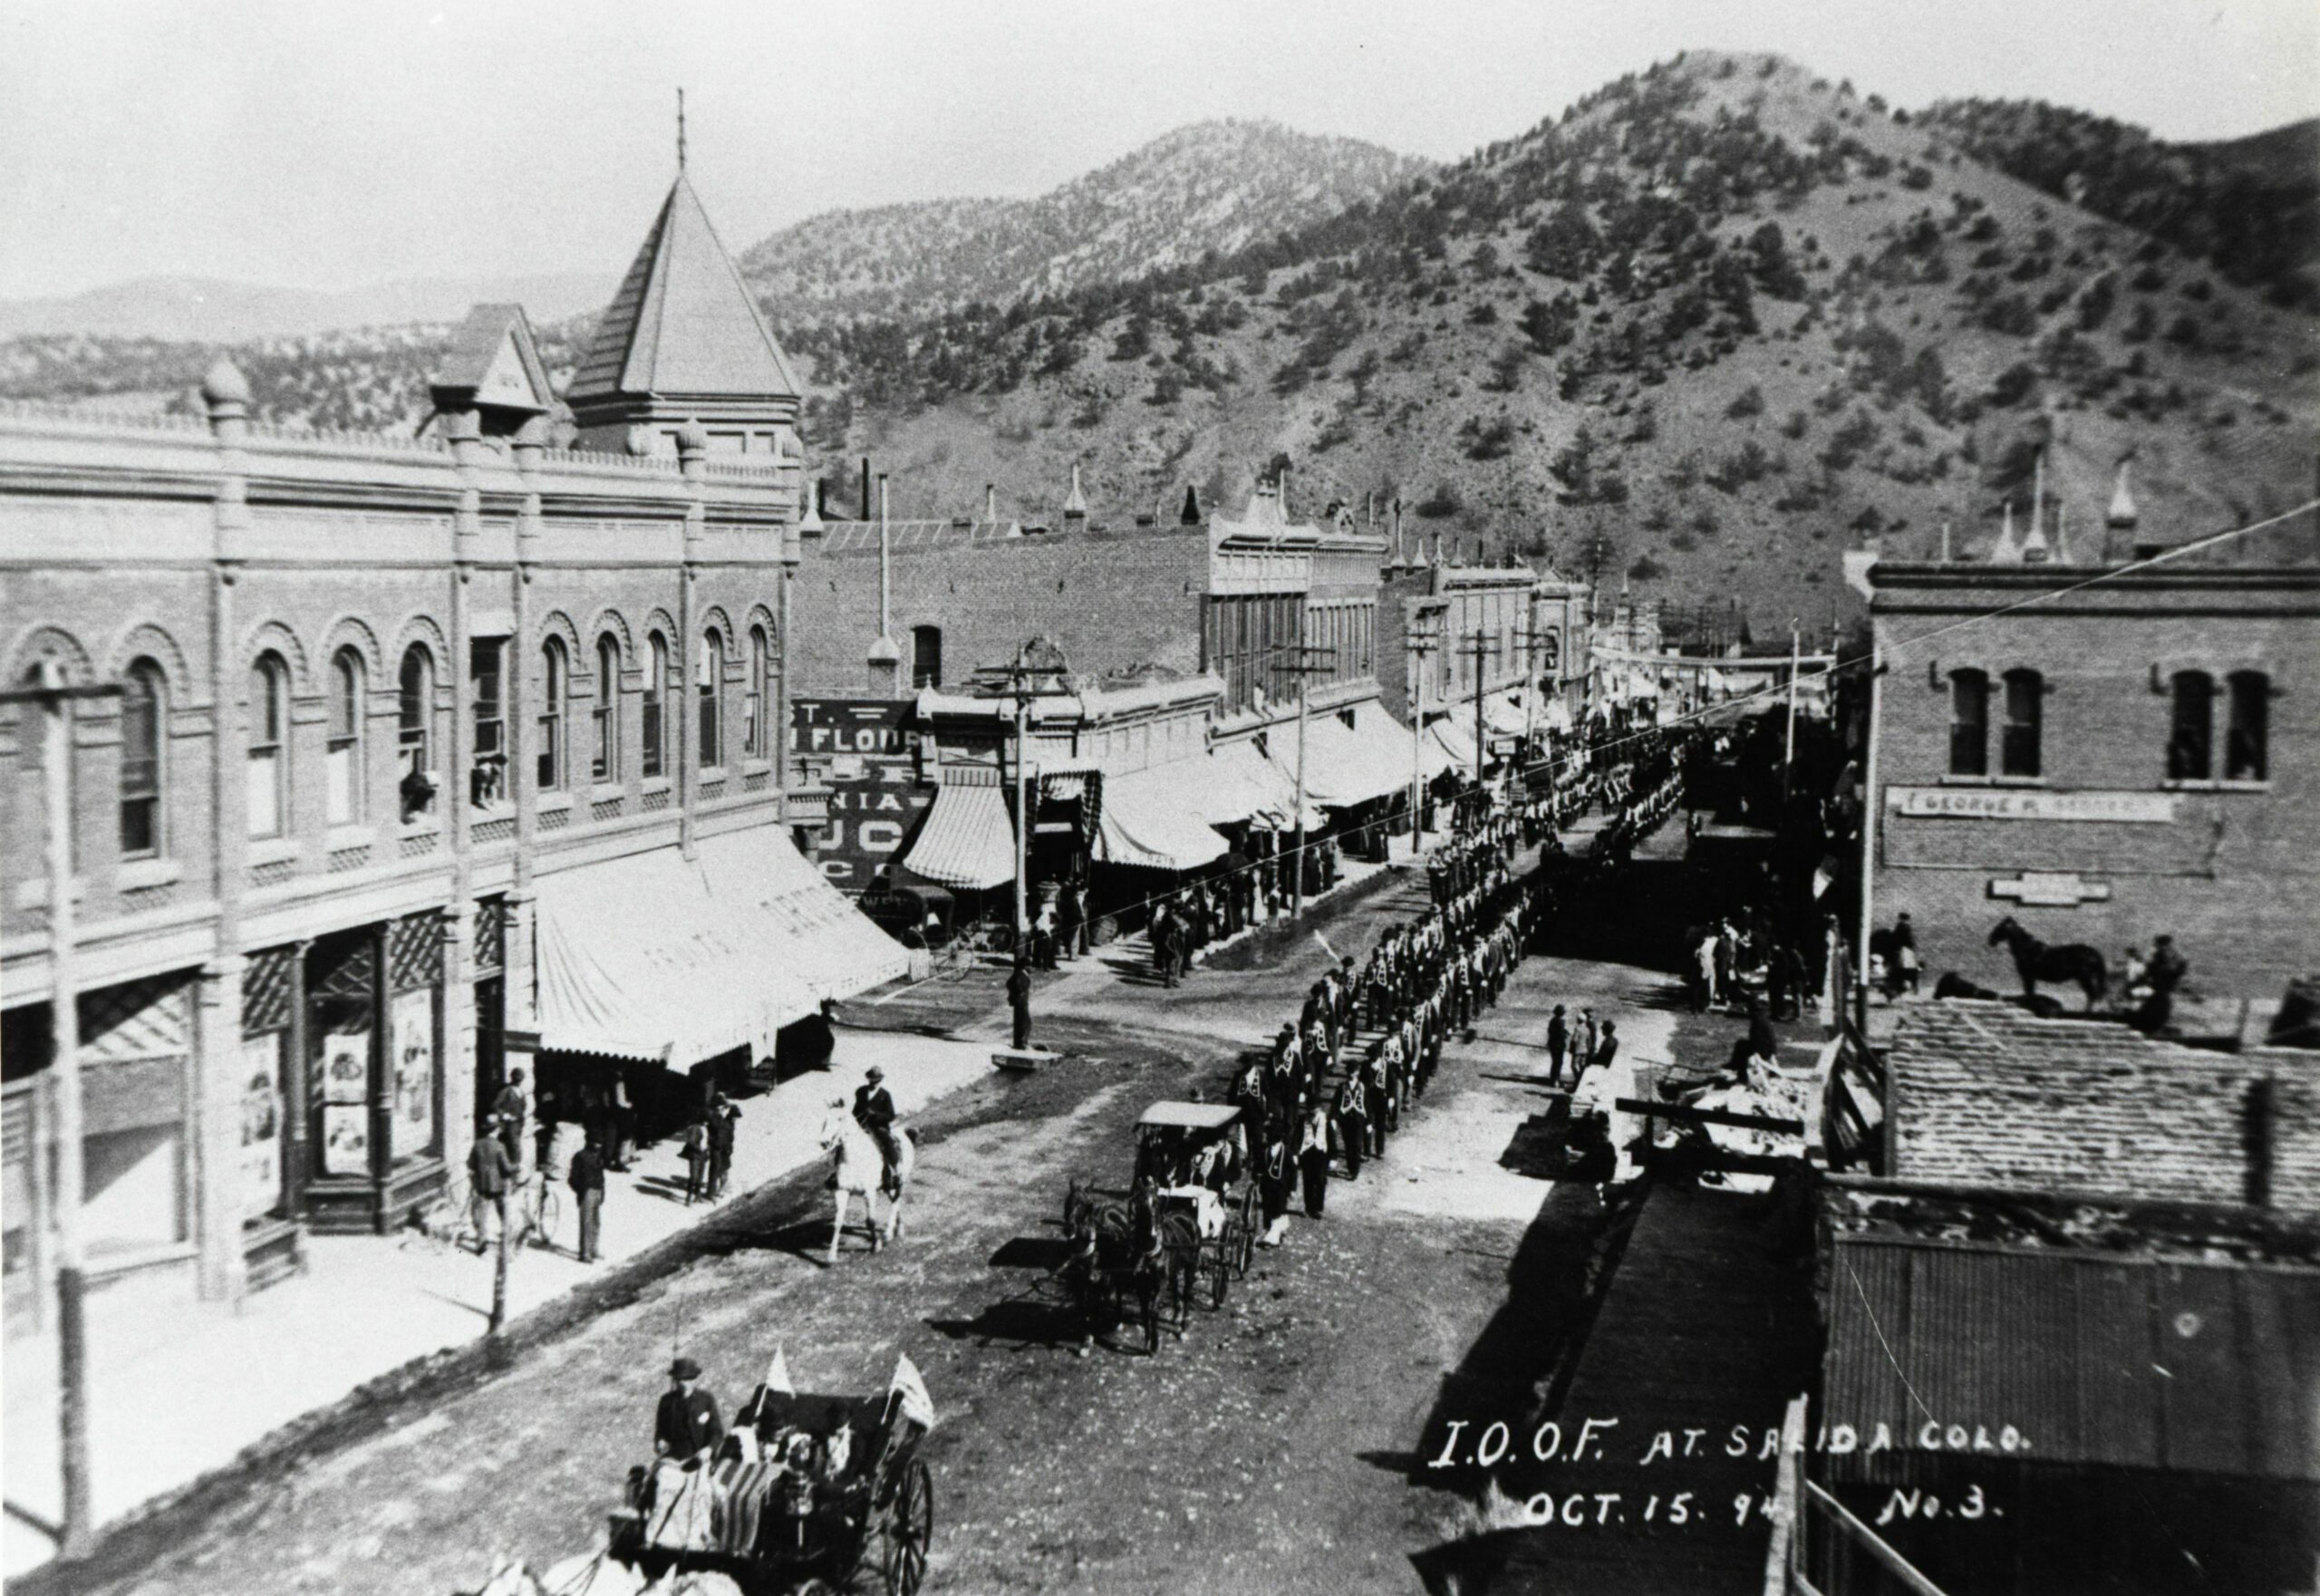 The International Order of Odd Fellows – during a statewide convention – parade up F Street October 15, 1894, preceded by dignitaries in carriages and followed by one of Salida’s marching bands. Cantons of the Independent Order of Odd Fellows perform military-style drills for prizes in a parade up F Street Oct. 16, 1894. The group held its Grand Encampment in Salida Oct. 15-18, 1894, complete with military-style parades, lodge meetings and dances organized by its ladies’ division, the Daughters of Rebekah.  Six years after the disastrous 1888 fire, there appears to be construction work in the lot on the corner of Second and F Streets where the Knights of Pythias building stands today. Alger’s Drug Store is in the J. M. Collins building (with the large awning) at the left. In 2001 this is the parking lot for Pueblo Bank and Trust.  (1)